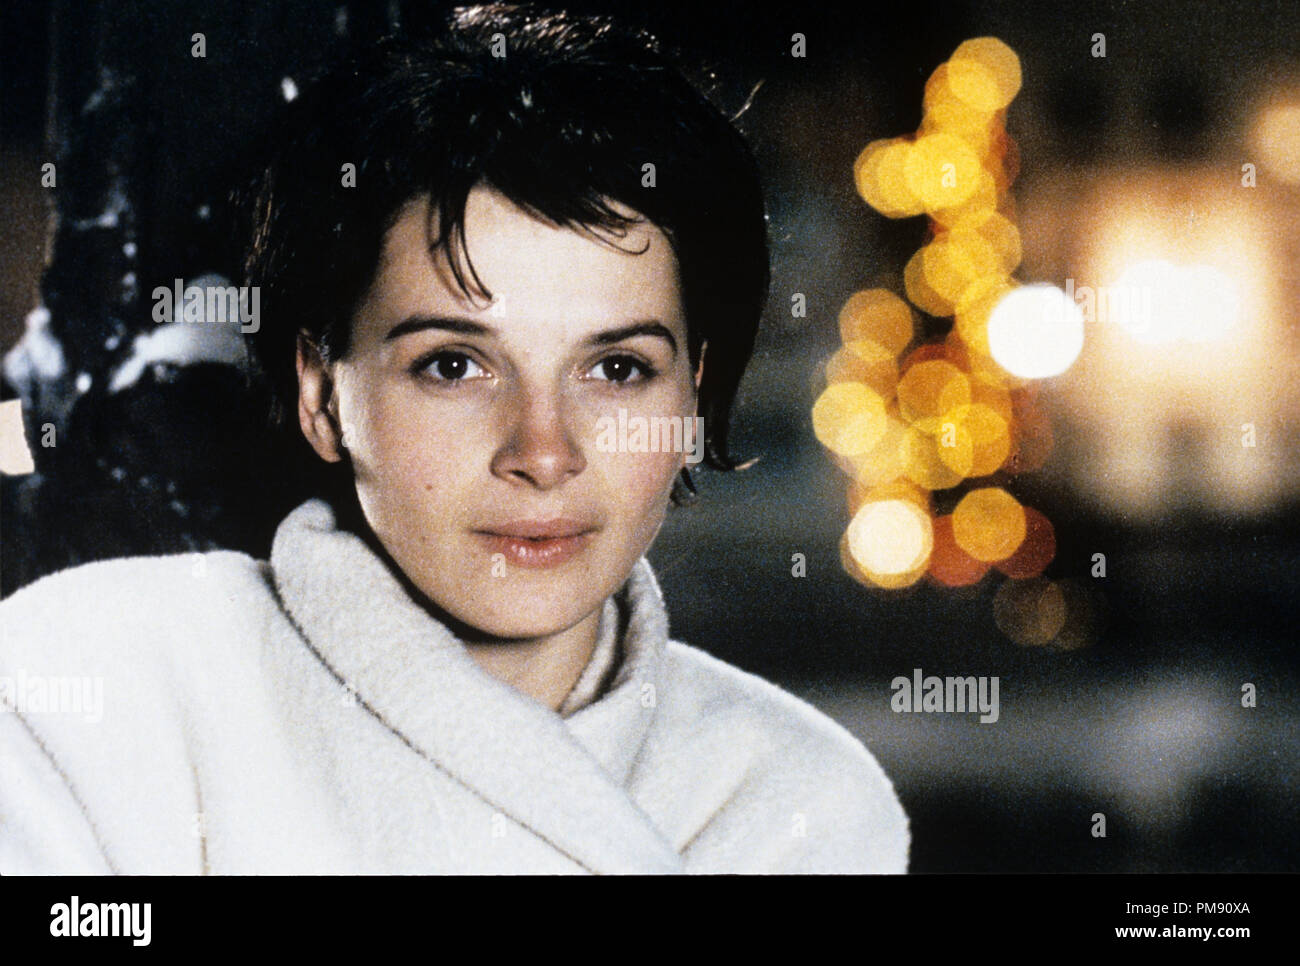 Film still or Publicity still from 'The Lovers on the Bridge' Juliette Binoche © 1991 Miramax Photo Credit: Benoit Barbier  All Rights Reserved   File Reference # 31527011THA  For Editorial Use Only Stock Photo